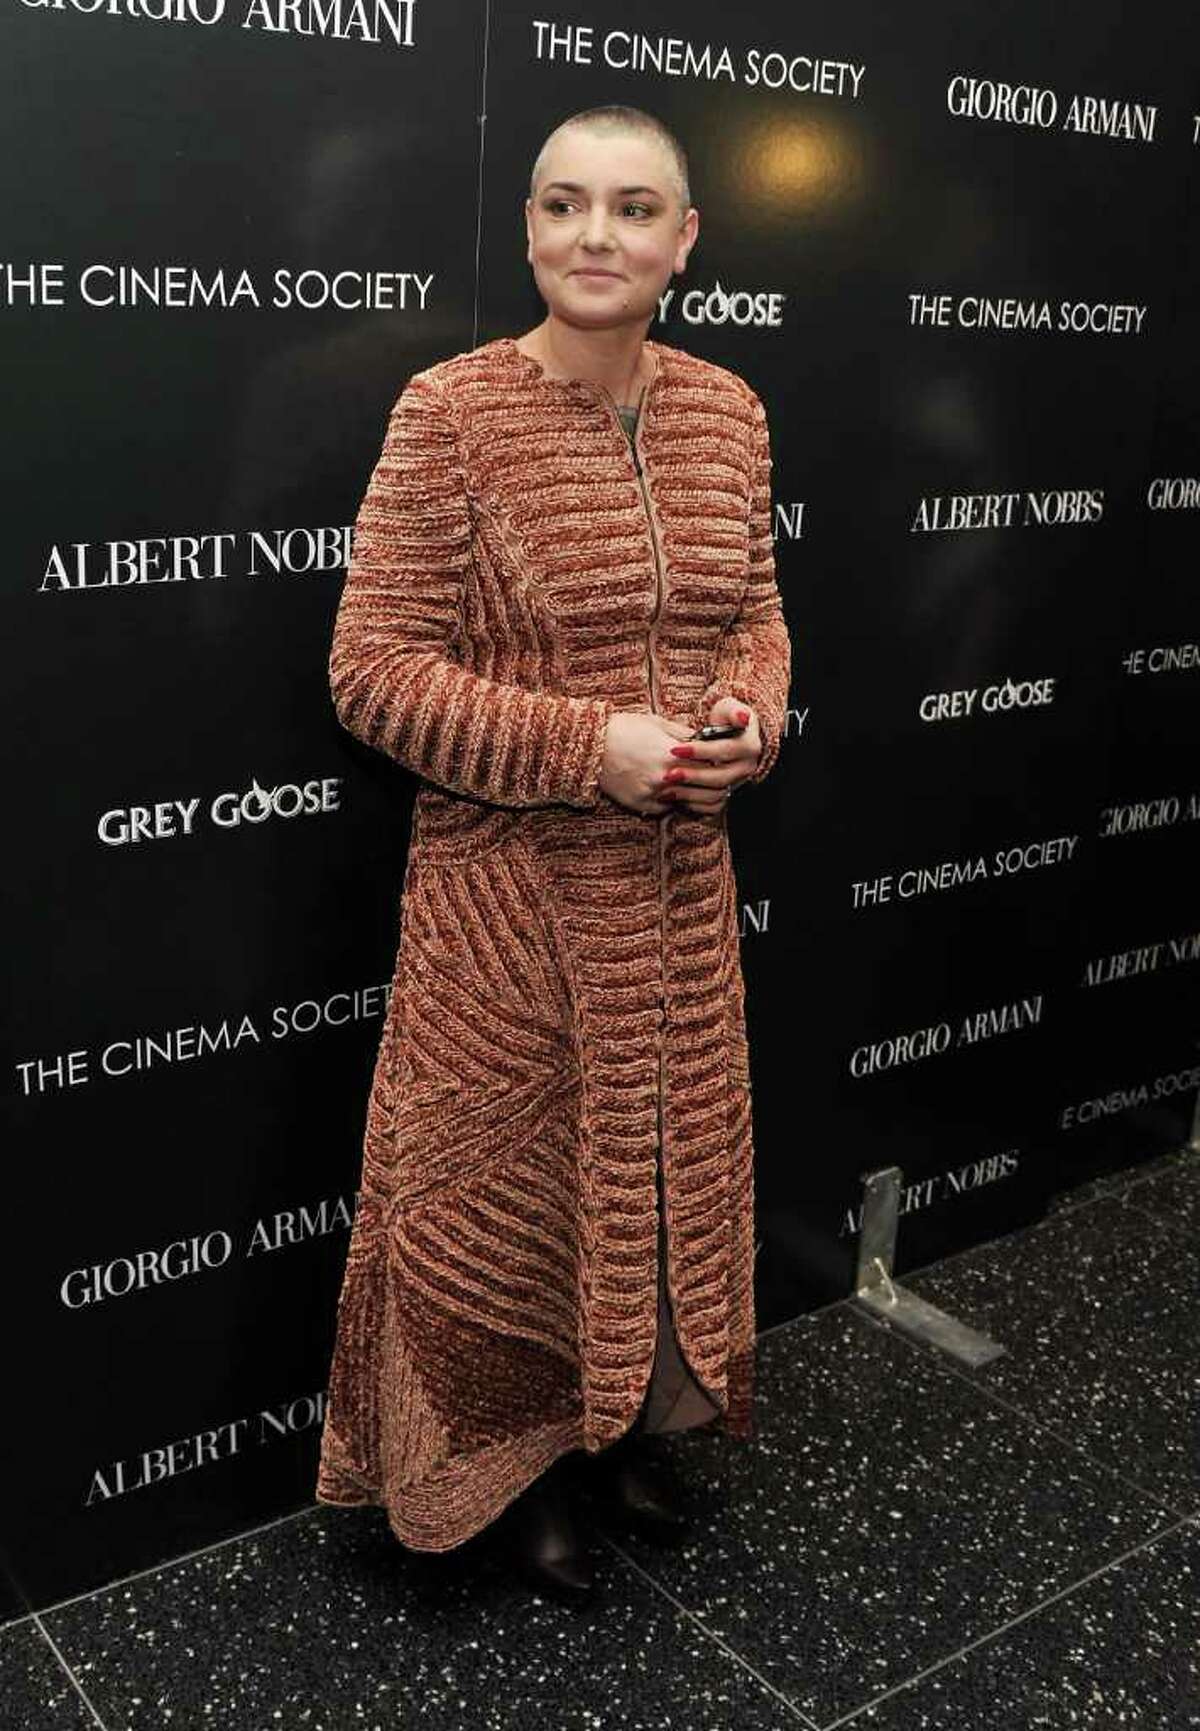 NEW YORK, NY - DECEMBER 13: Singer Sinead O'Connor attends the Giorgio Armani & Cinema Society screening of "Albert Nobbs" at the Museum of Modern Art on December 13, 2011 in New York City. (Photo by Stephen Lovekin/Getty Images)